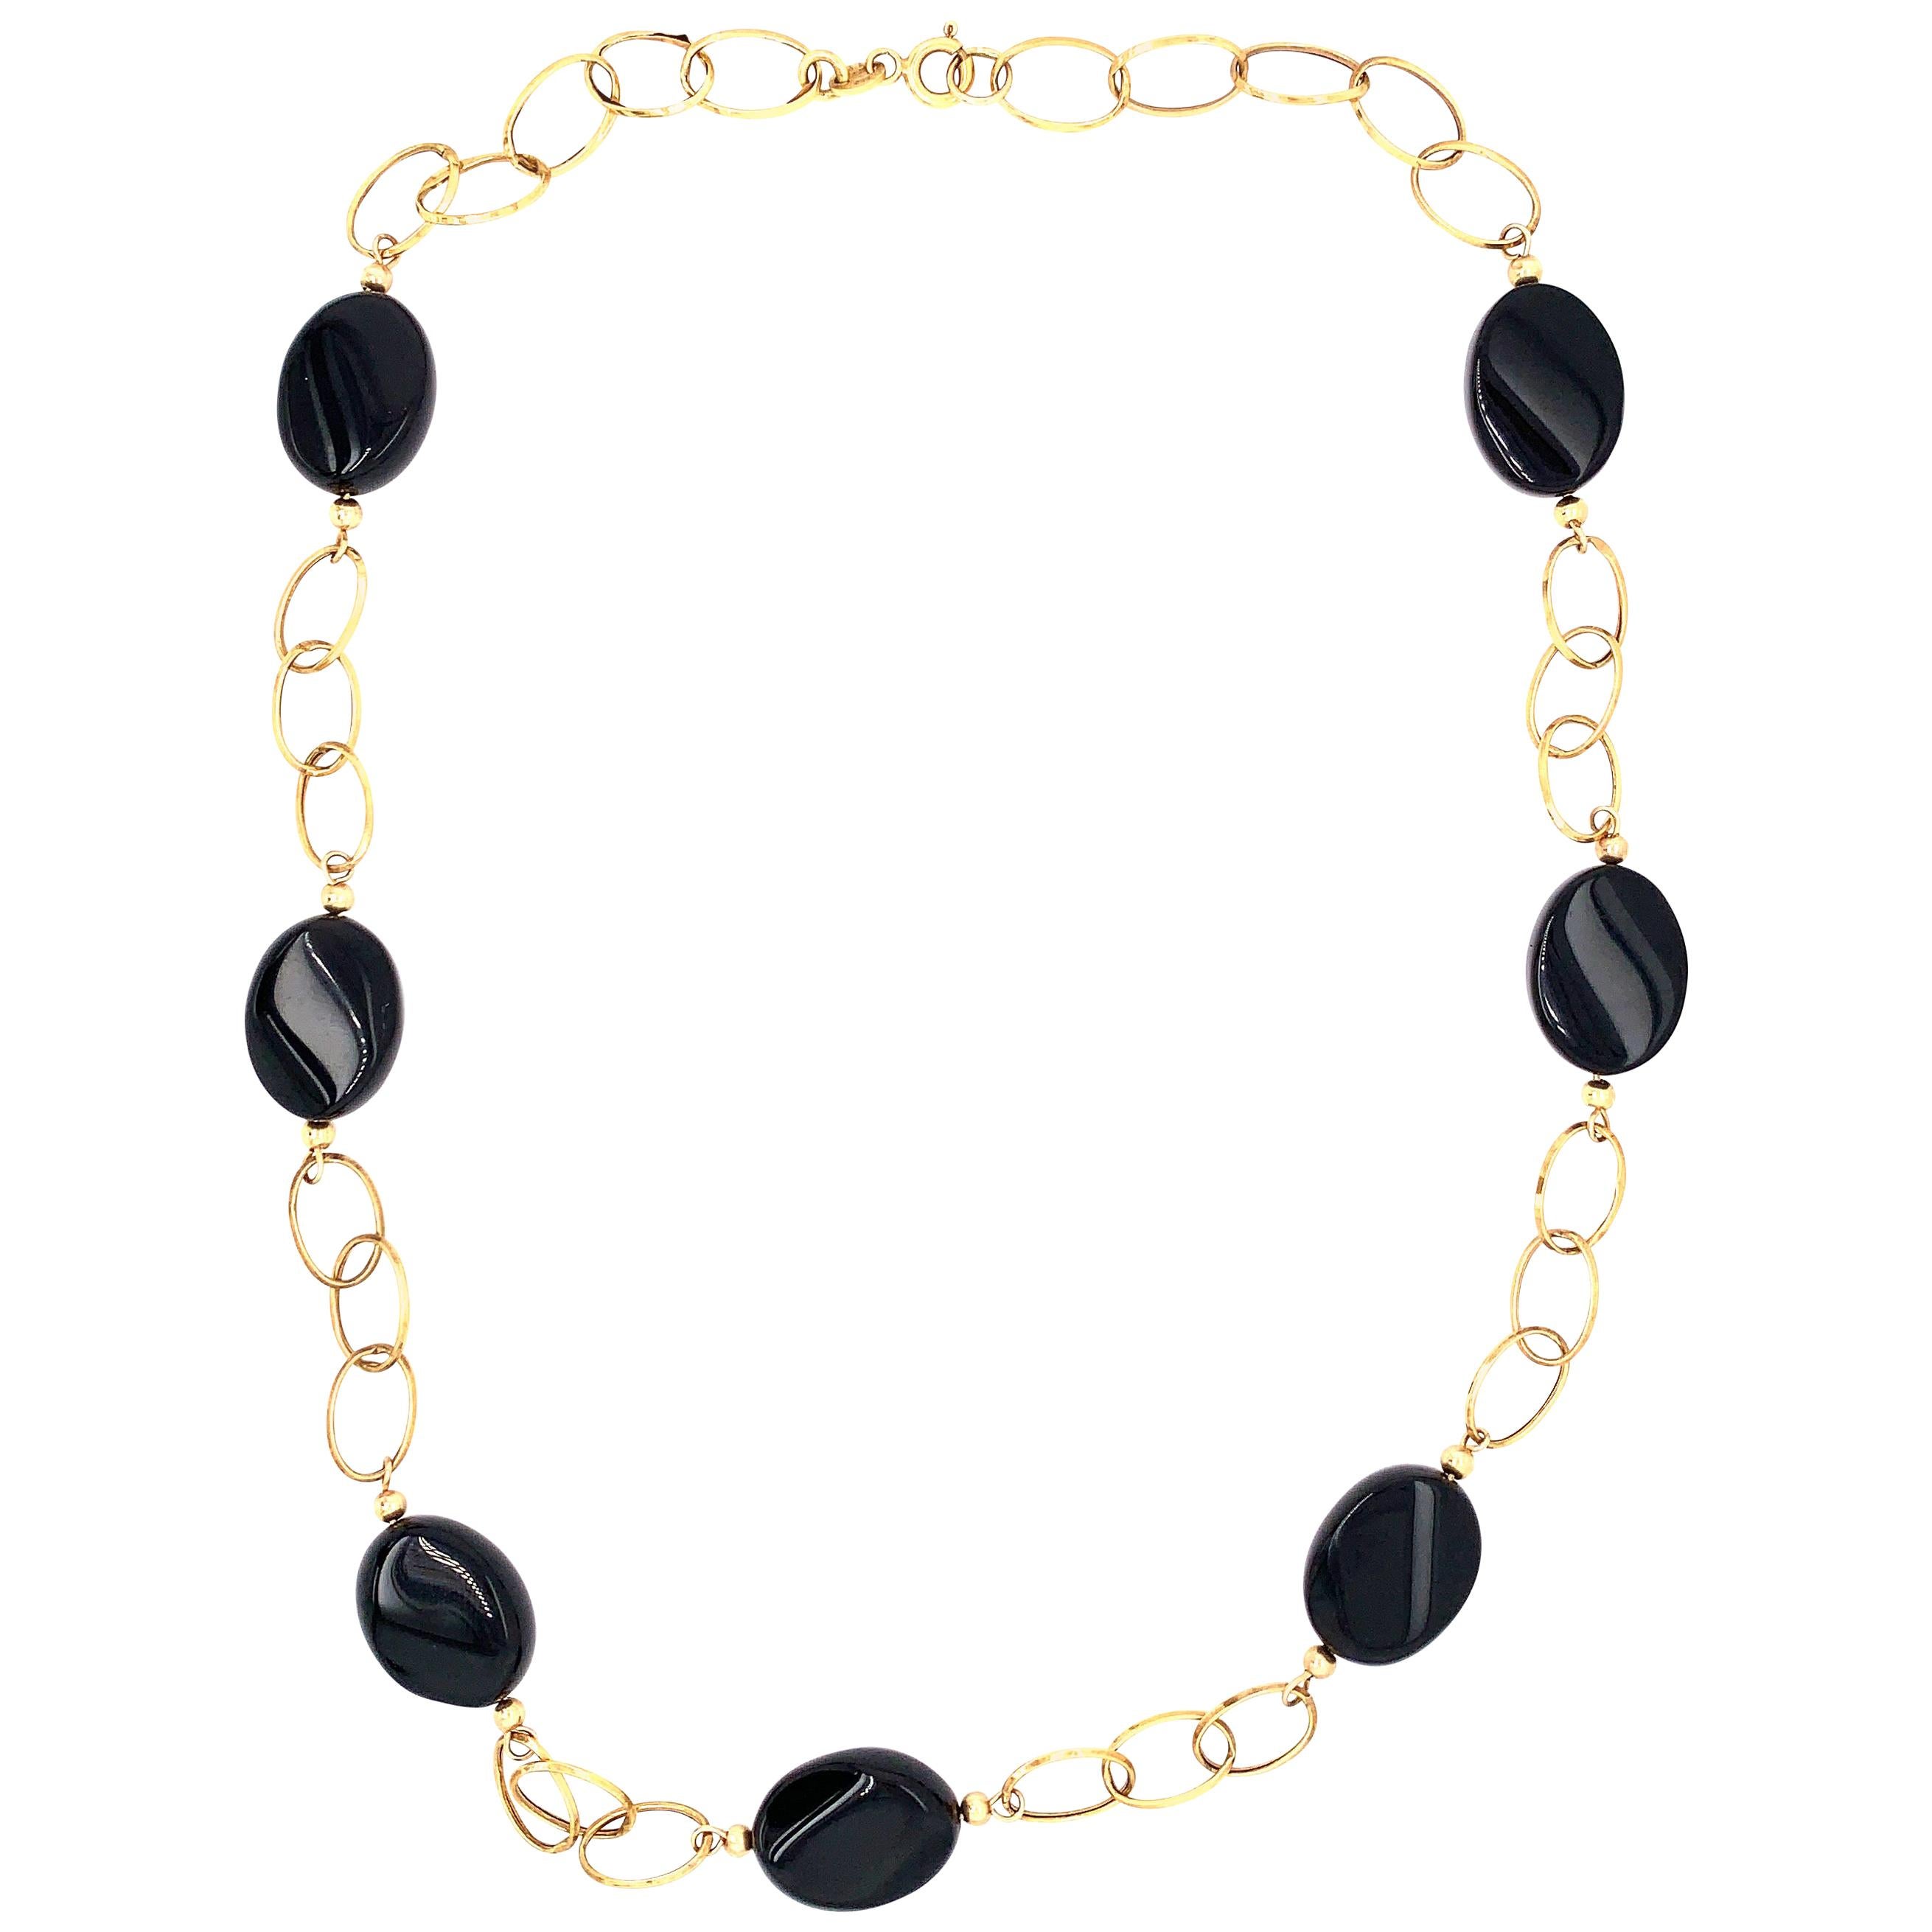 14 Karat Yellow Gold Link Necklace with Ebony Stones 21.2 Grams Total For Sale